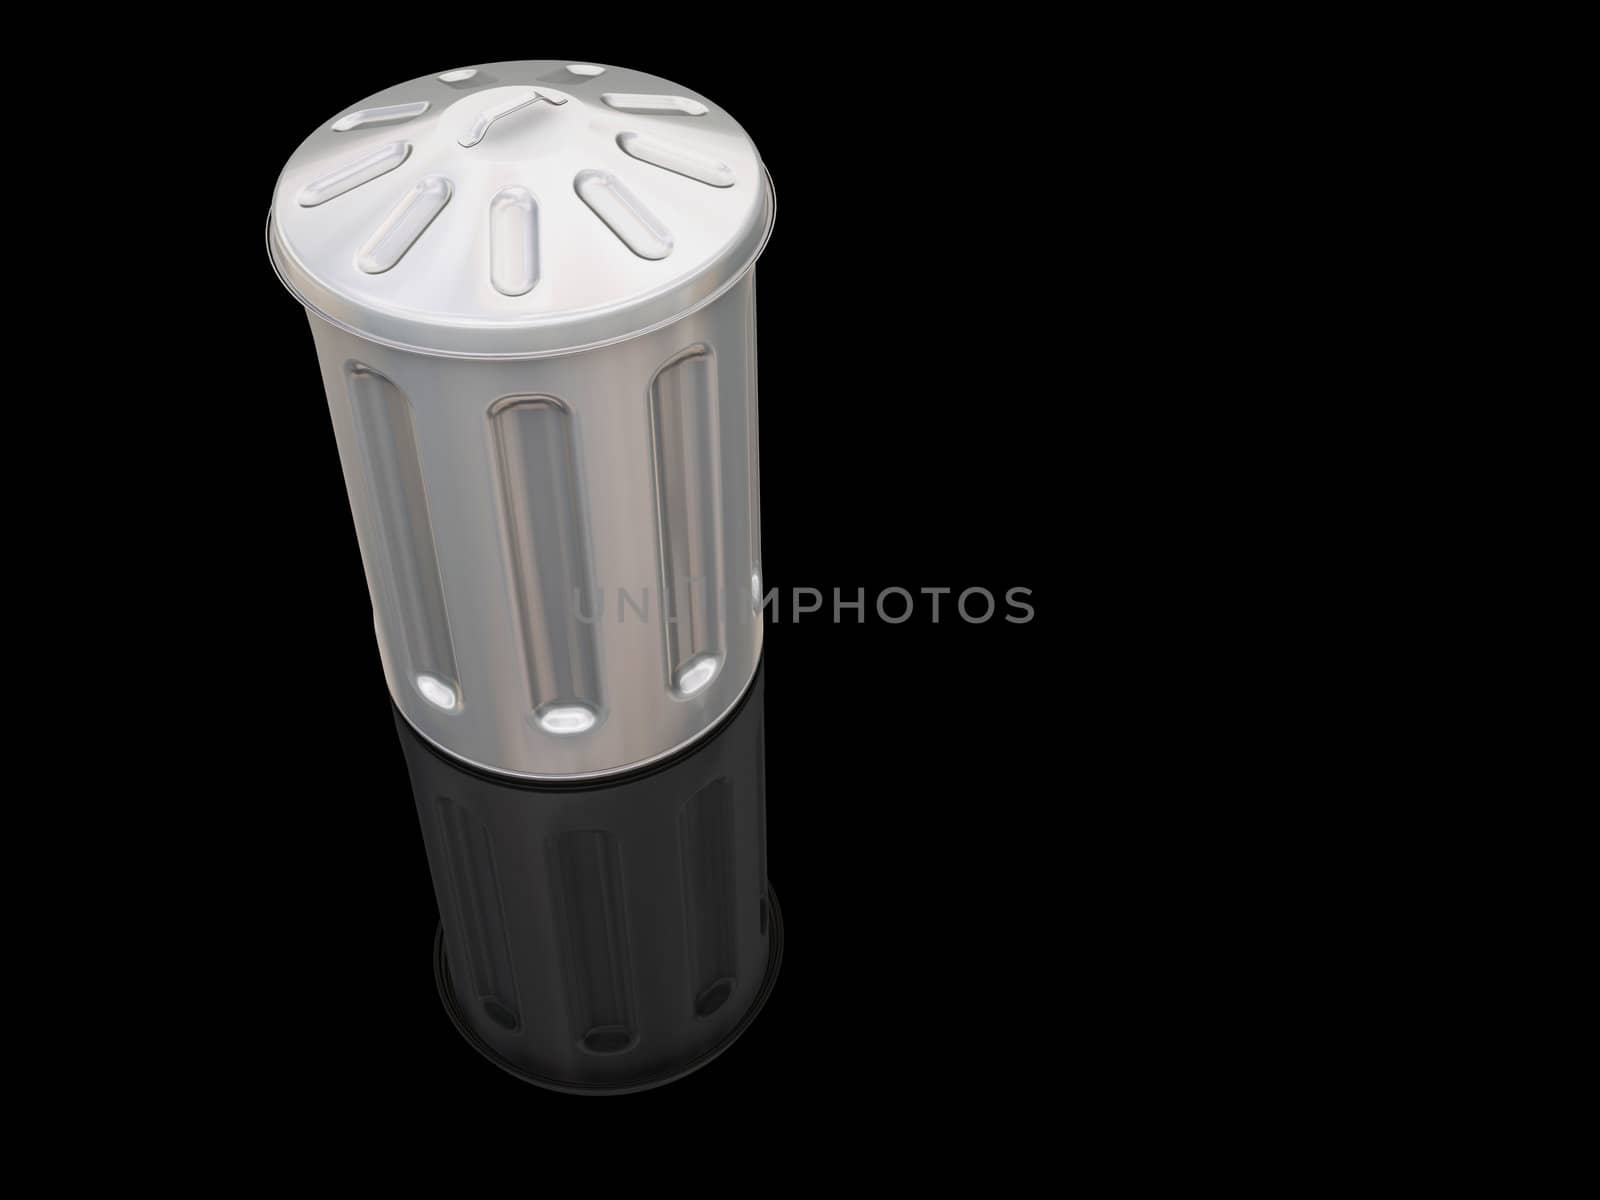 3D render of a trash can